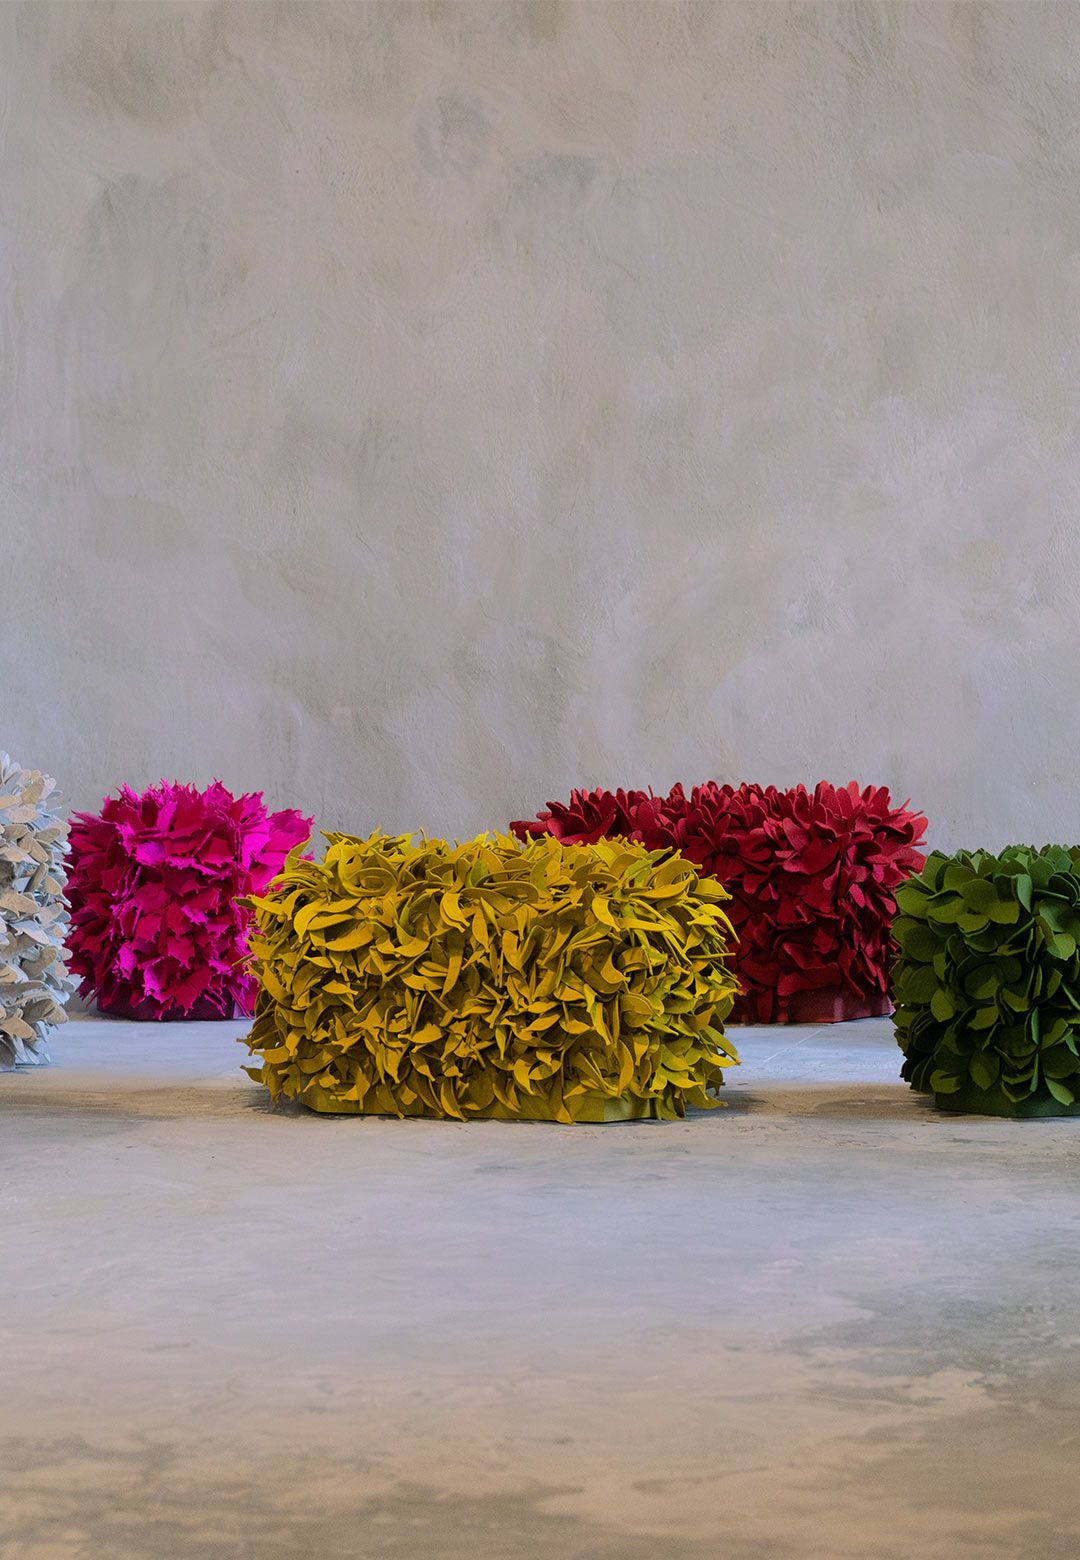 Fefostudio fuses gastronomy and weaving to create sculptural ottomans in wool felt